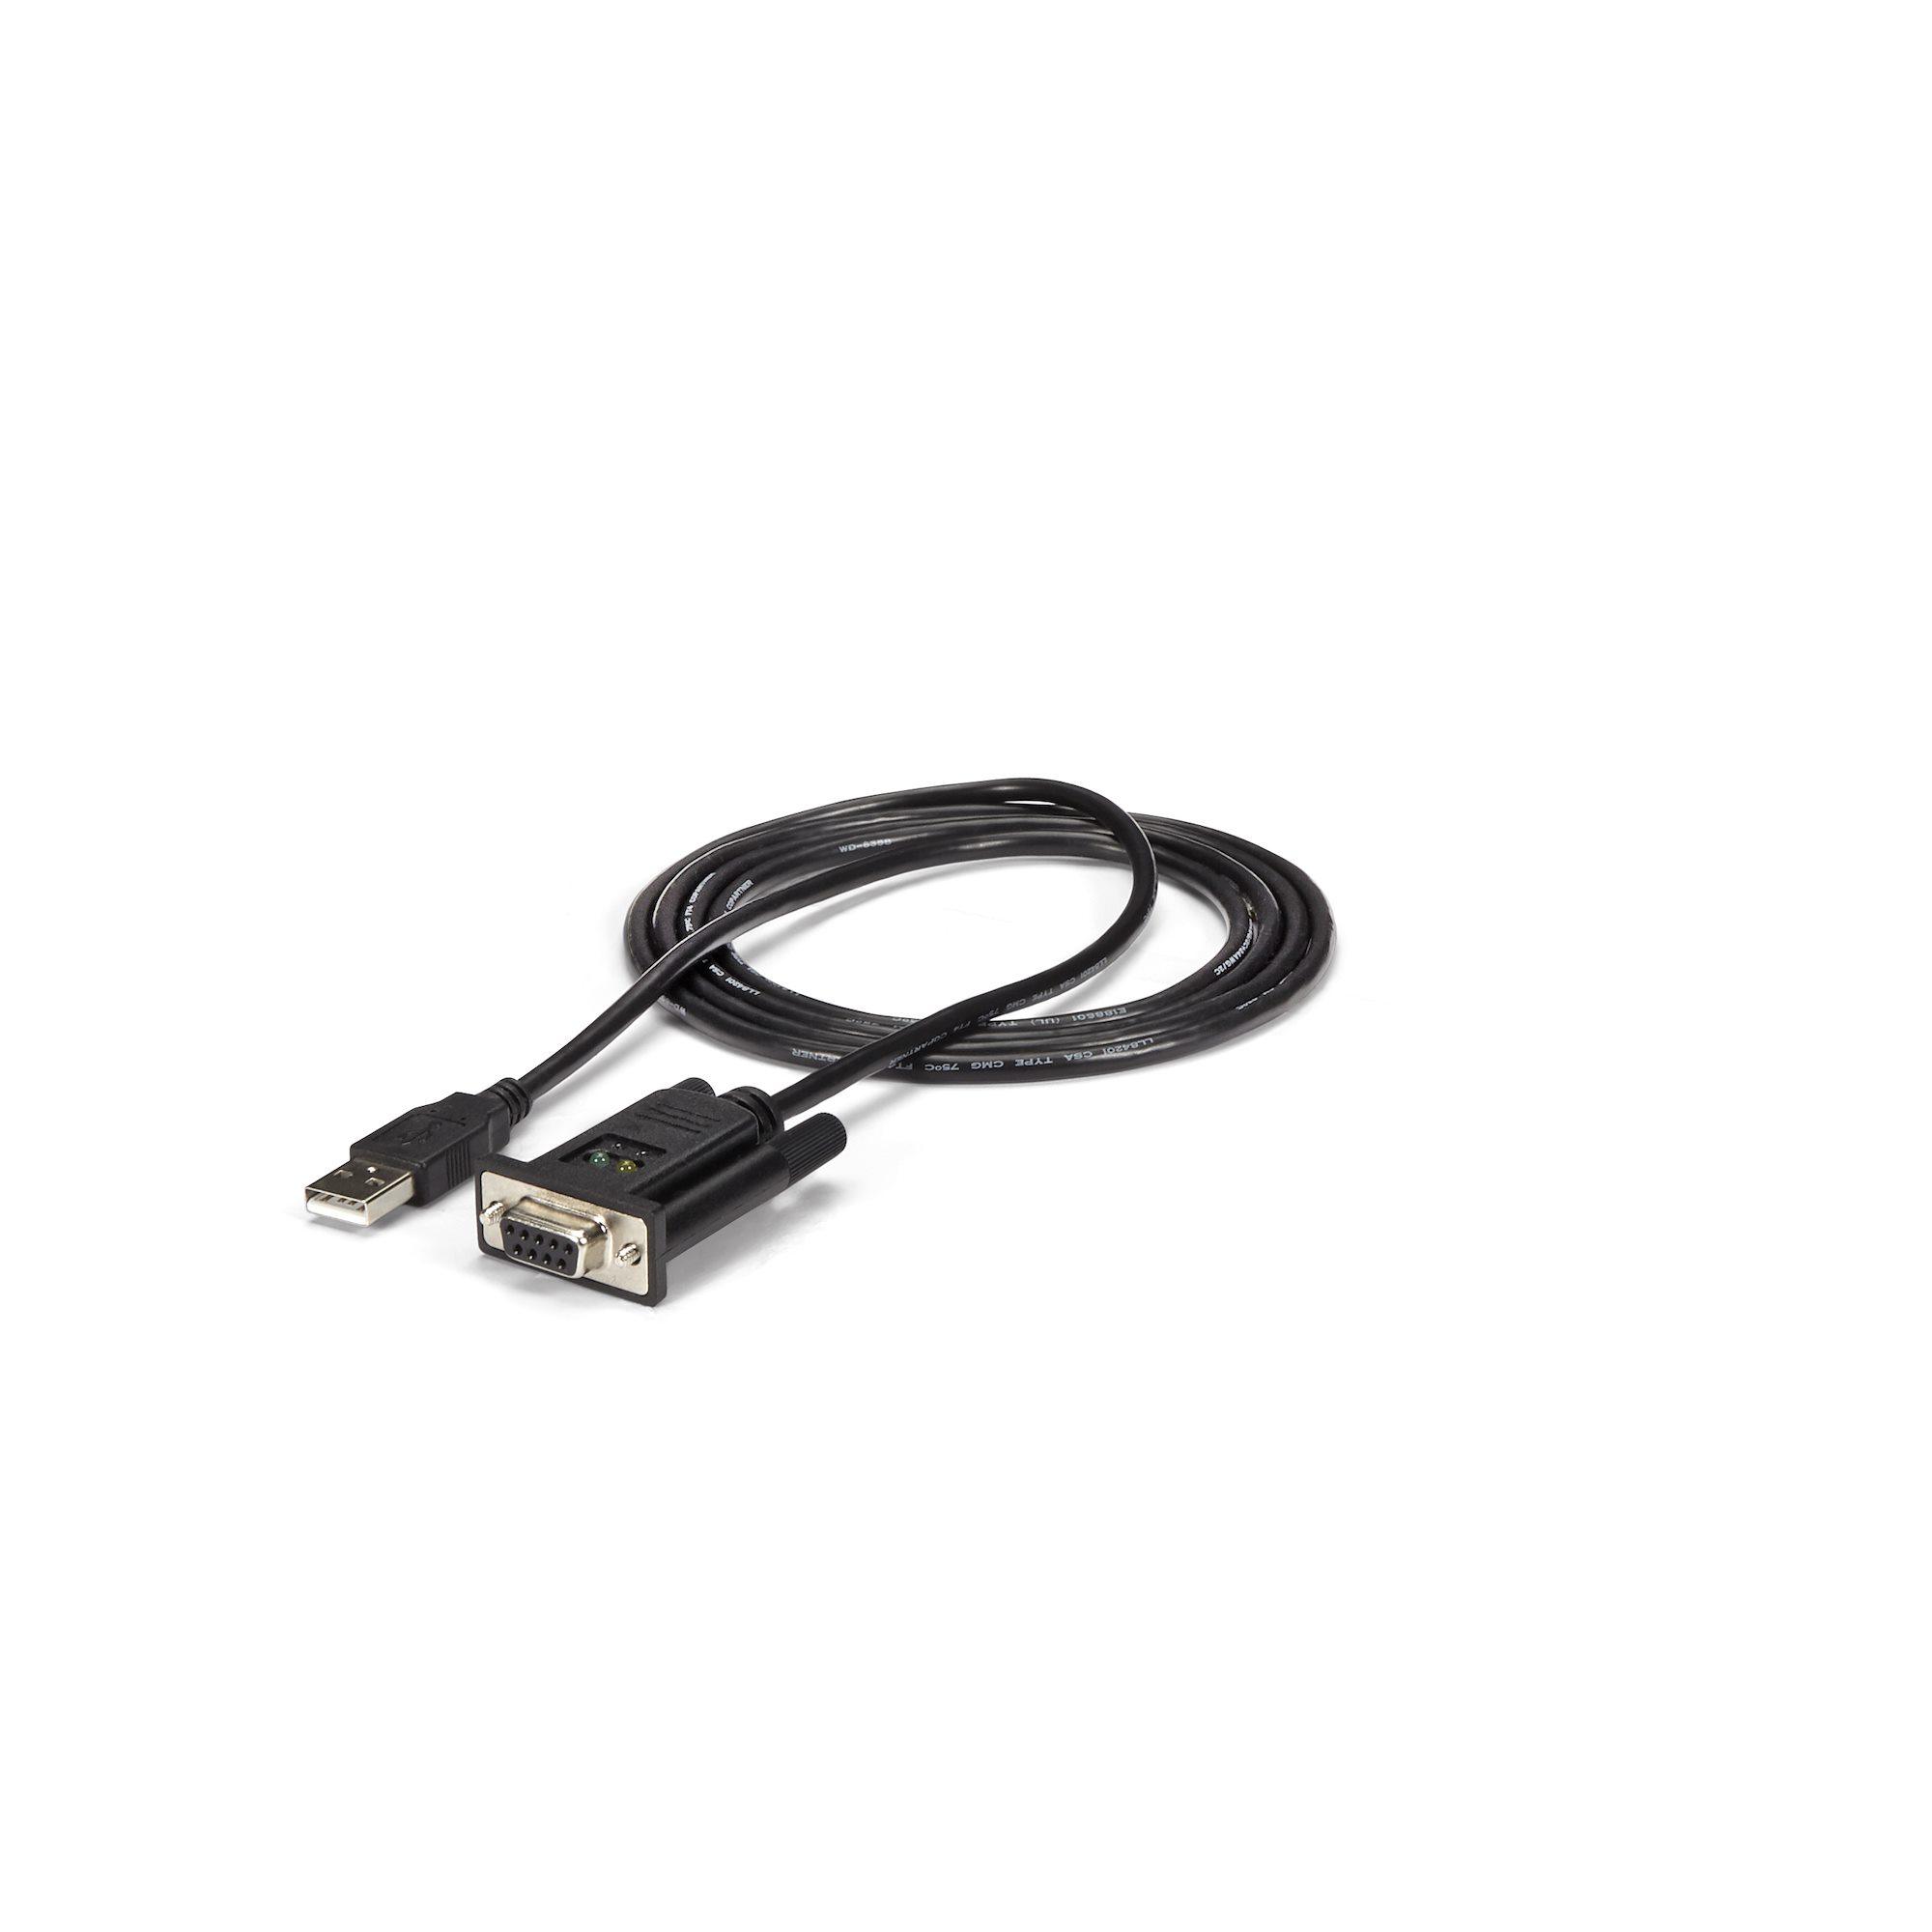 【ICUSB232FTN】USB TO SERIAL DCE ADAPTER